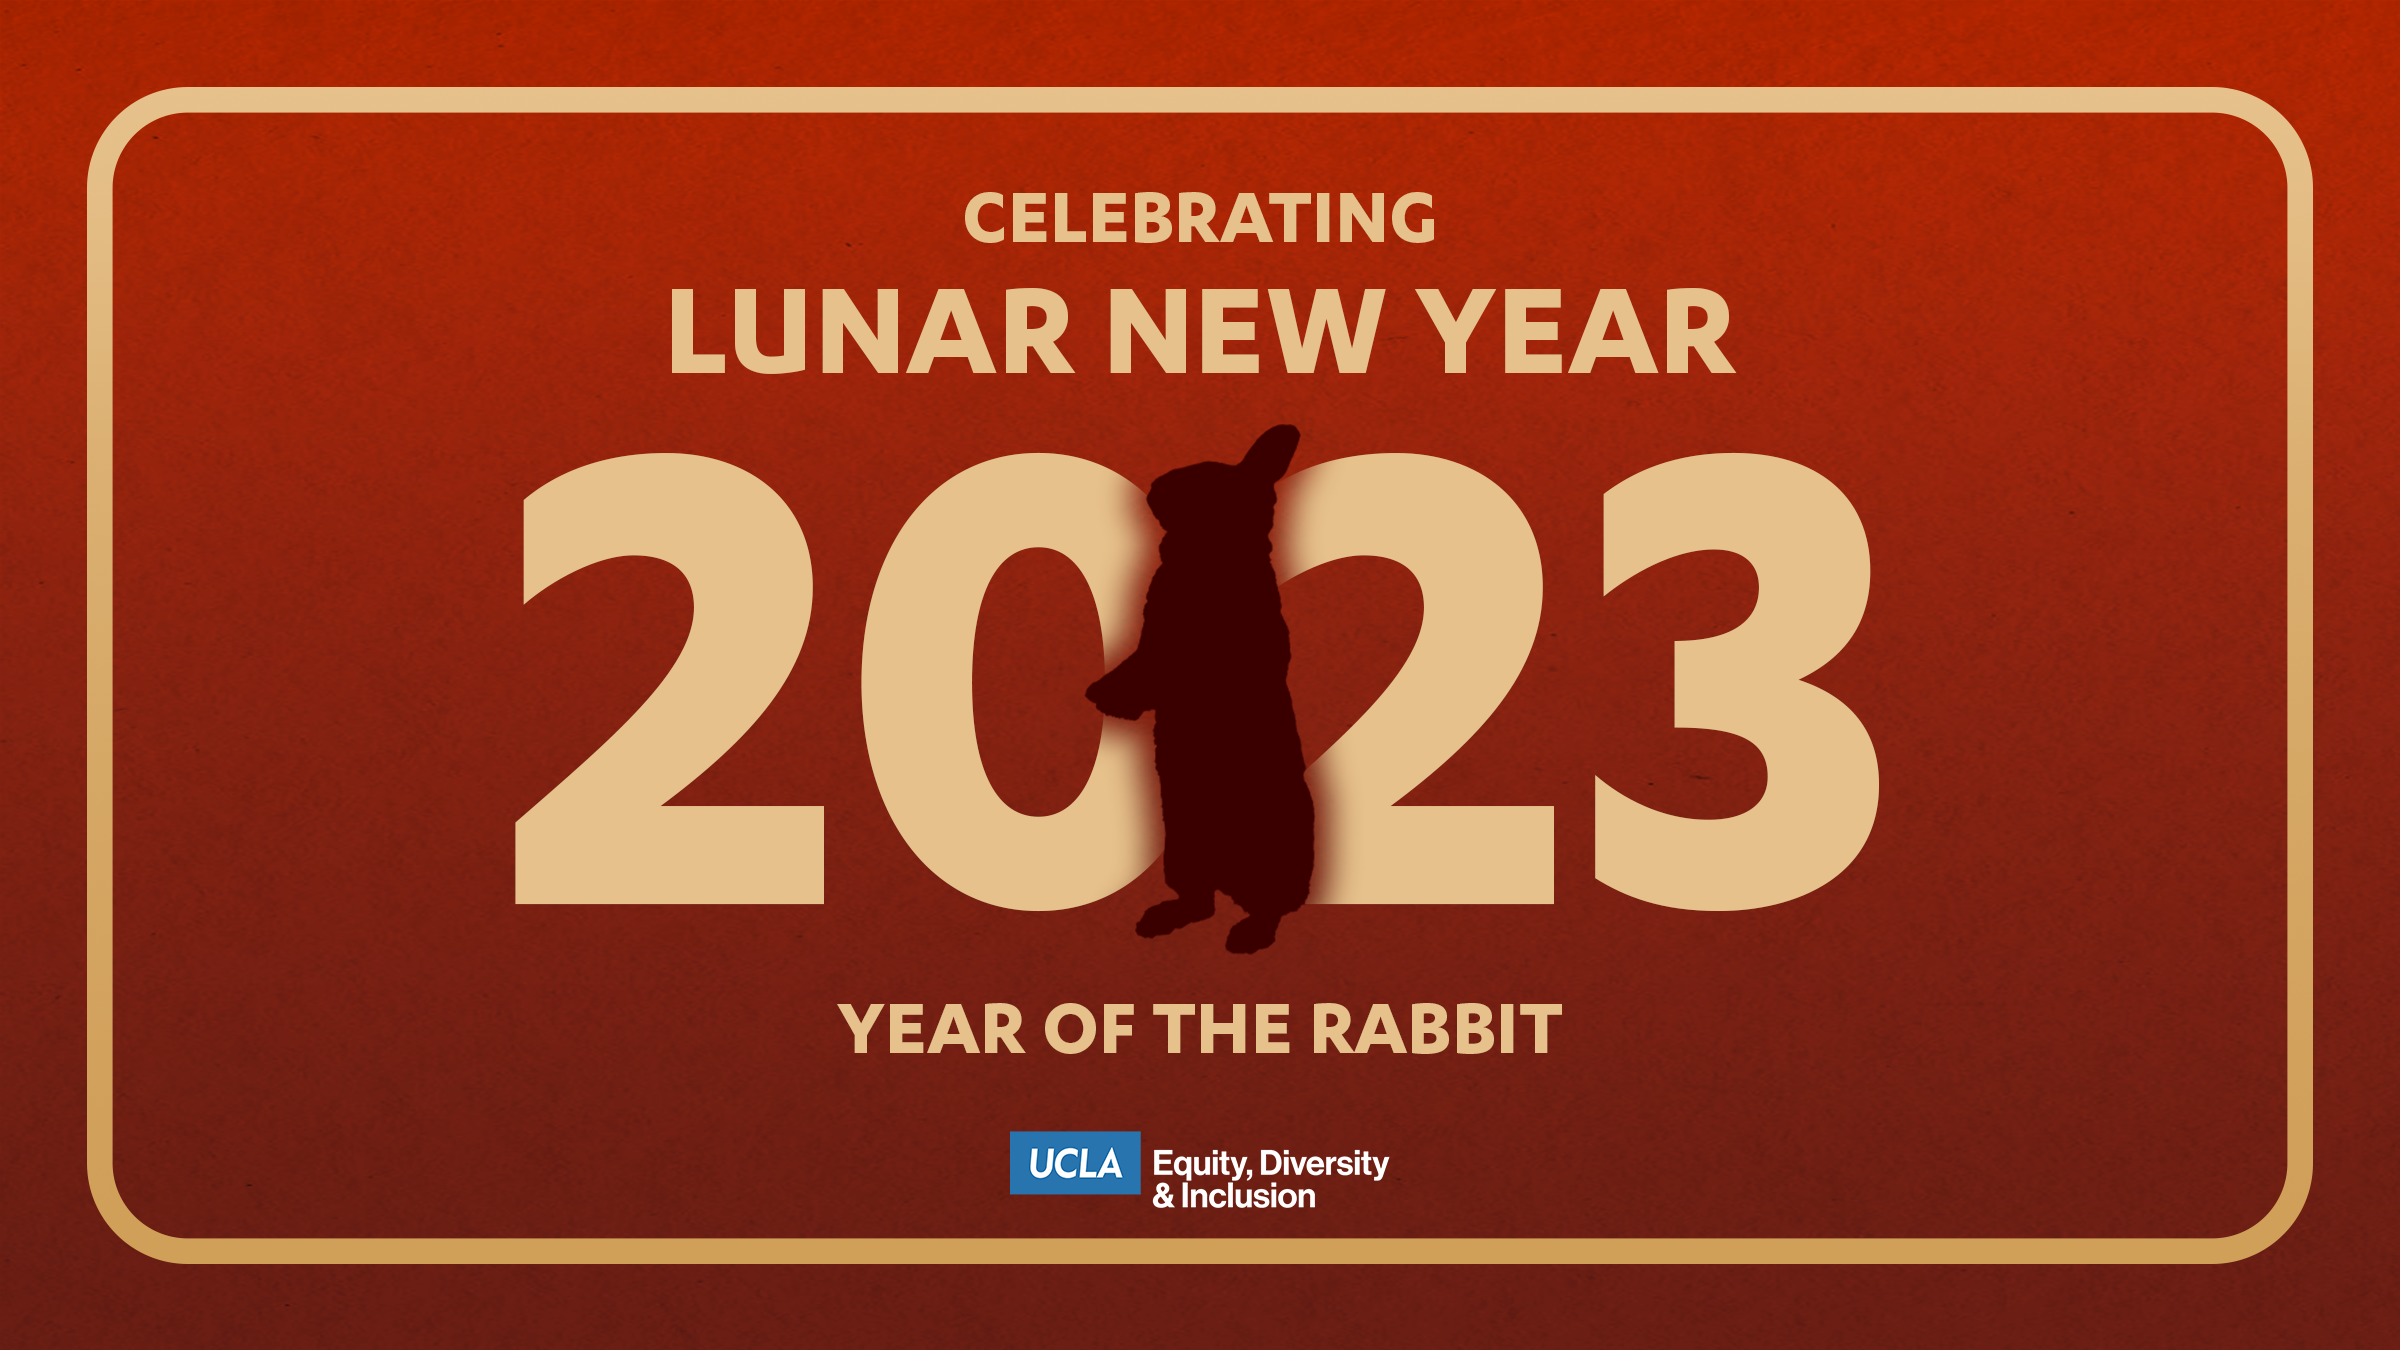 celebrating lunar new year 2023 - the year of the rabbit. rabbit shadow in the center of the frame